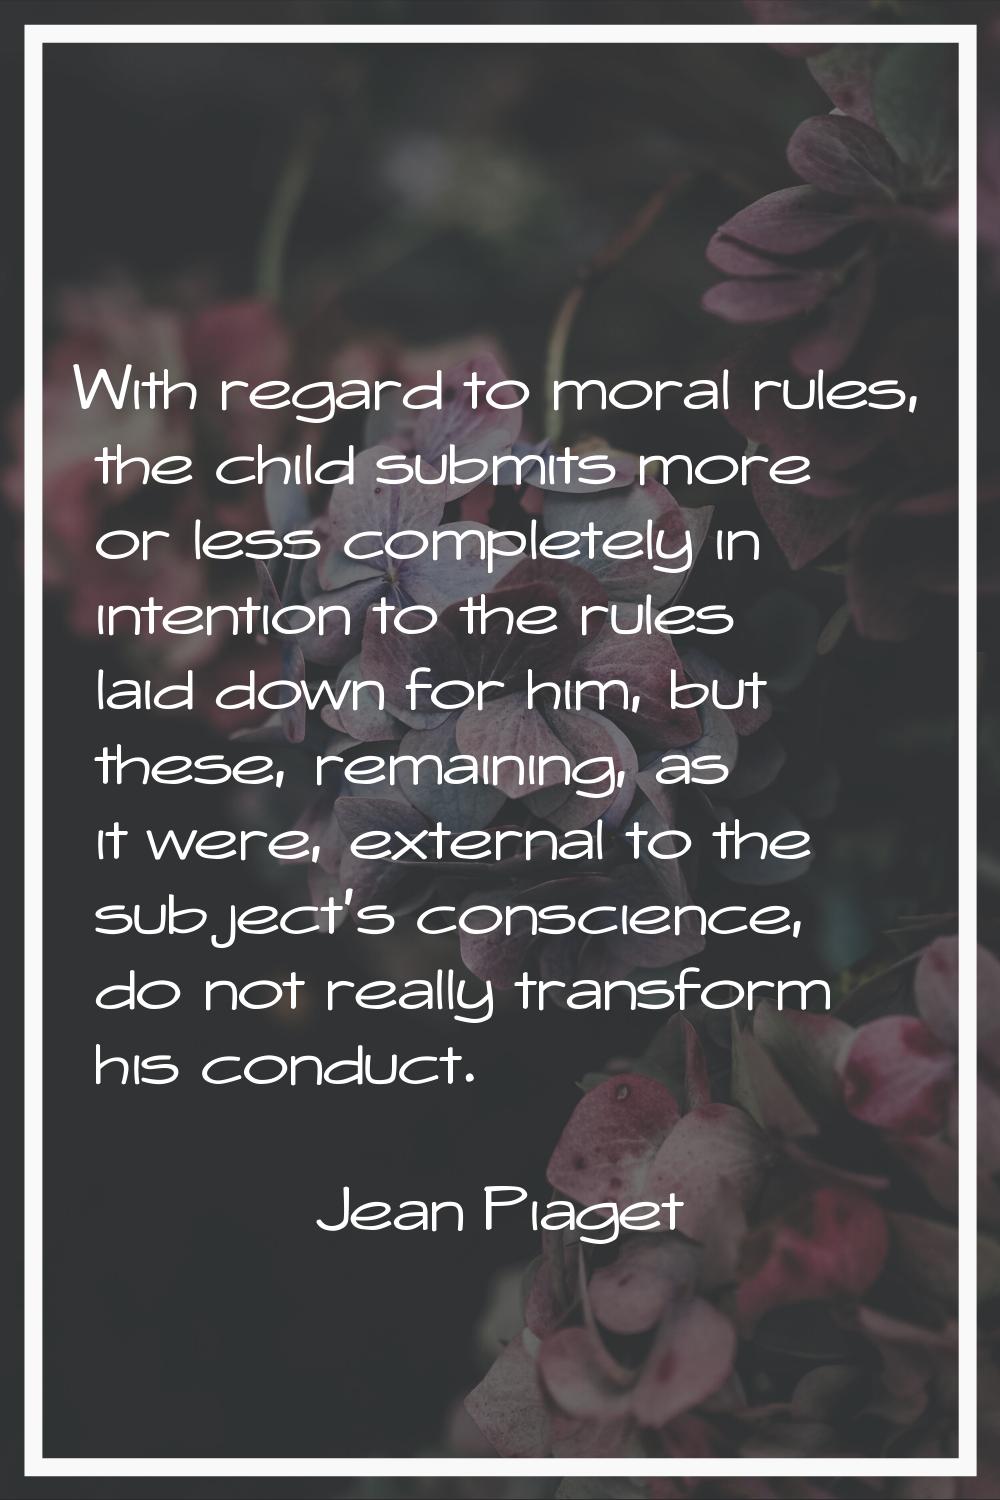 With regard to moral rules, the child submits more or less completely in intention to the rules lai